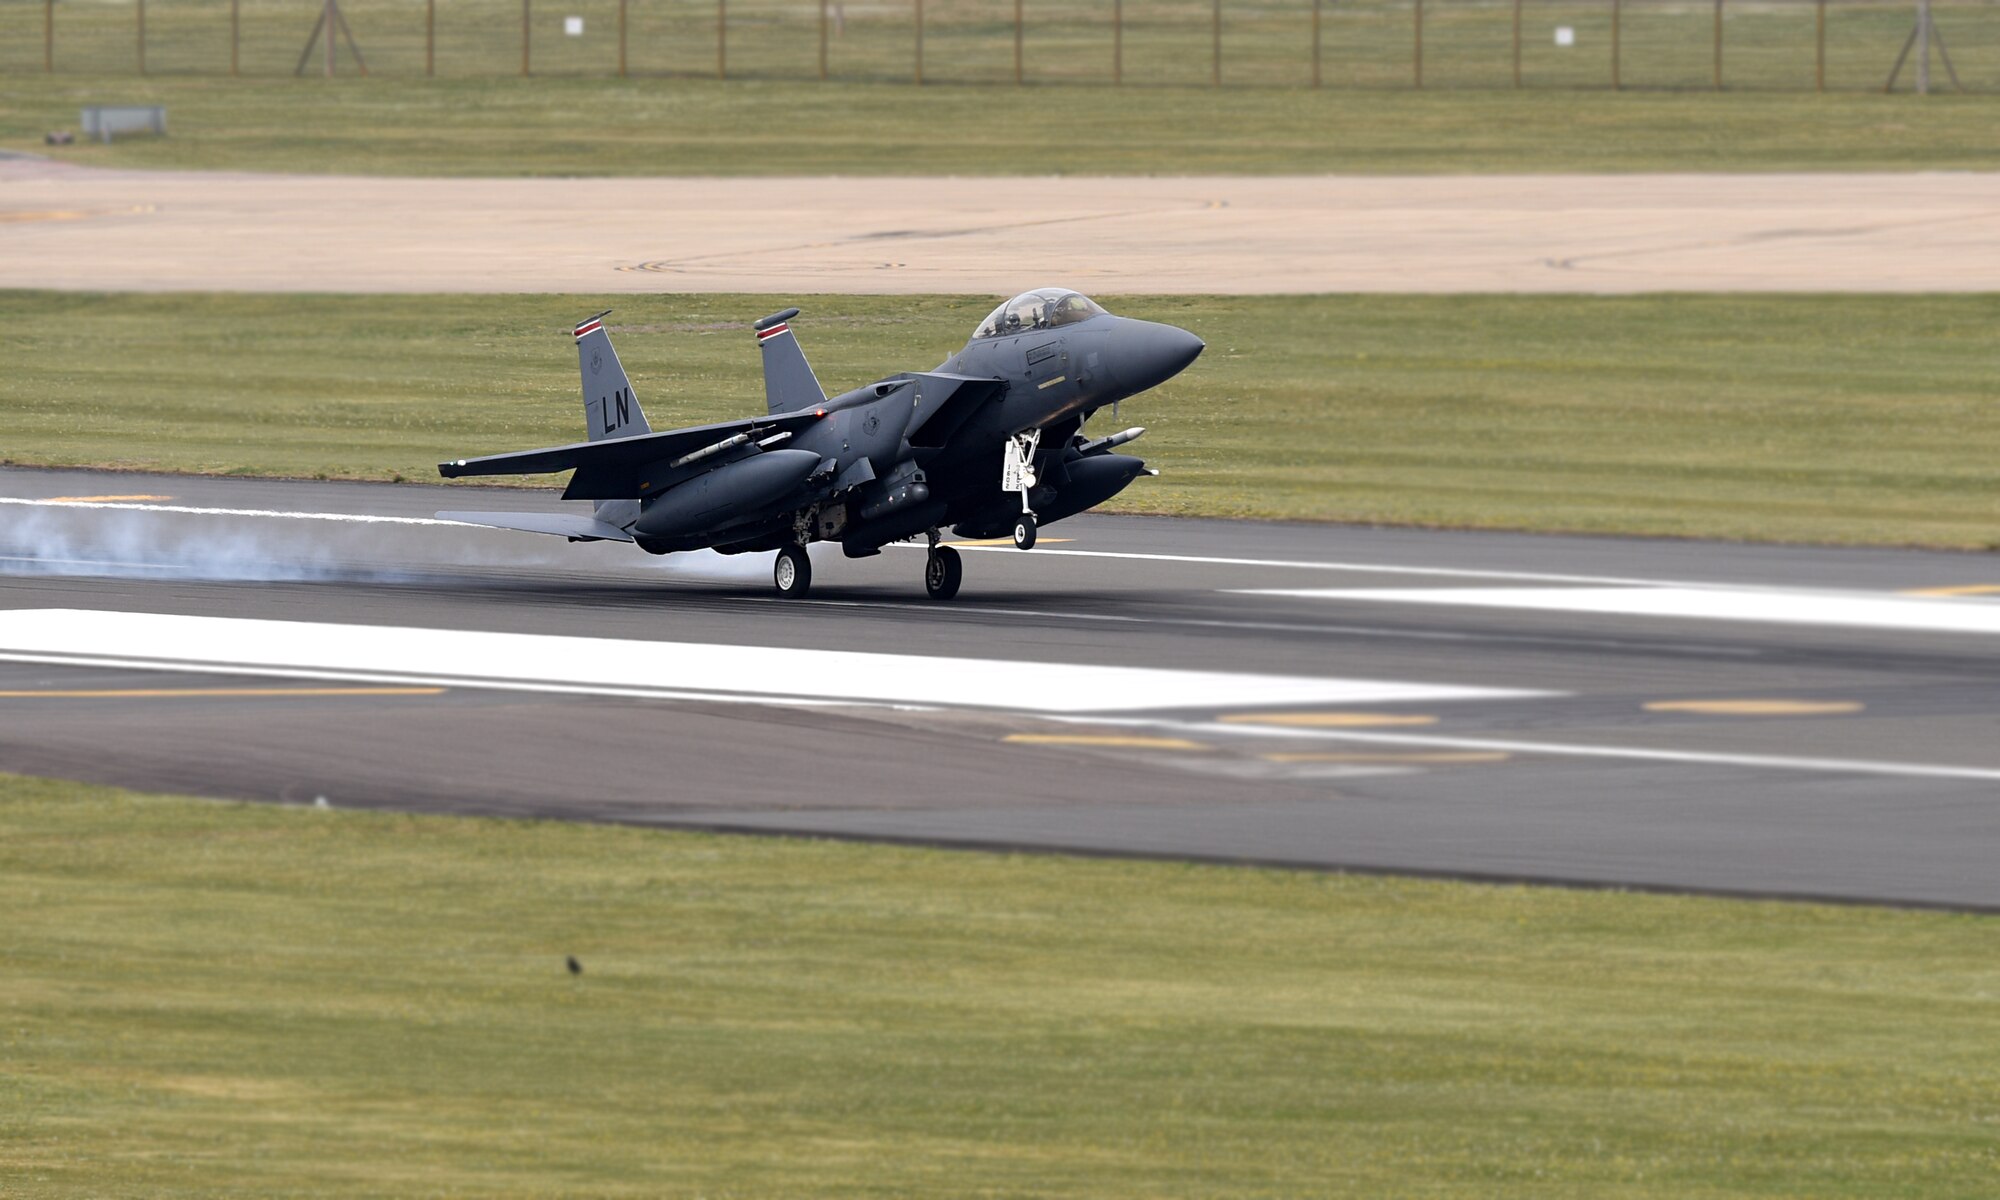 An F-15E Strike Eagle assigned to the 494th Fighter Squadron lands on the flight line at Royal Air Force Lakenheath, England, April 23, 2019. The 48th Fighter Wing is participating in a readiness exercise from 23-25 April focused on continuous operations over a 48-hour period. (U.S. Air Force photo by Airman 1st Class Madeline Herzog)